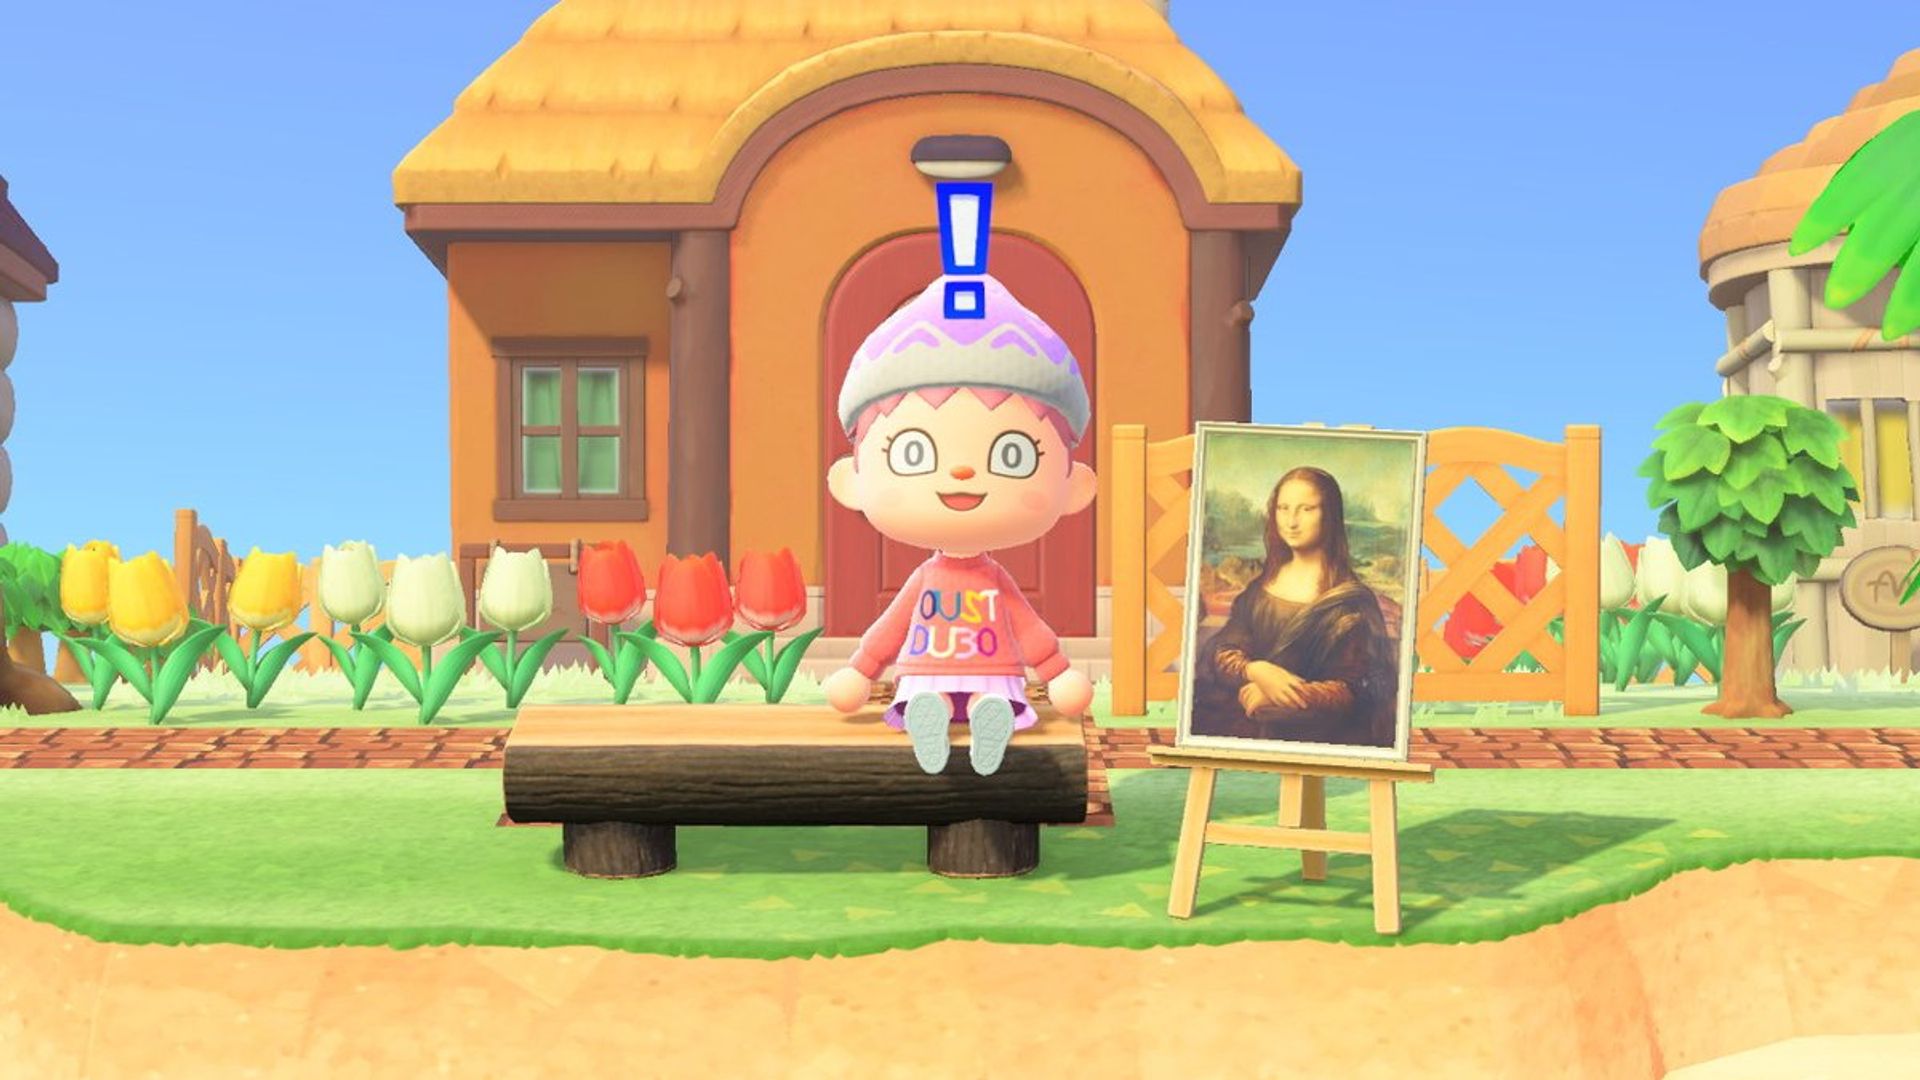 You can buy the Mona Lisa in Animal Crossing: New Horizons https://twitter.com/AcnhLeeloo/status/1253582451034615808